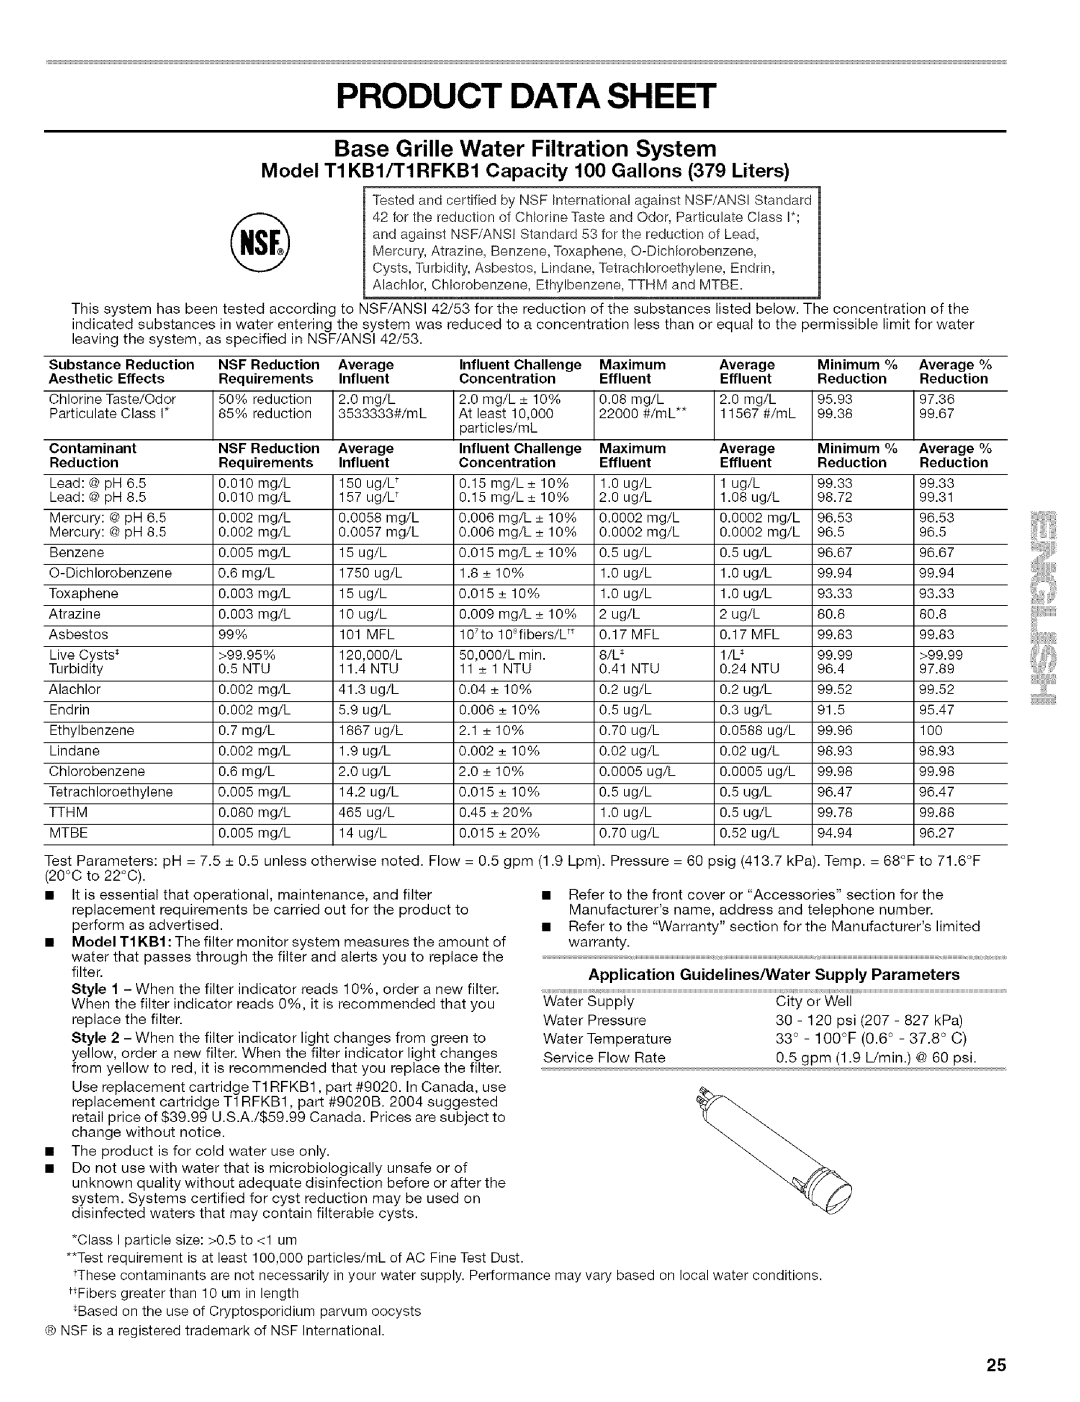 Kenmore 2305761A manual Product Data Sheet, Base Grille Water Filtration System 